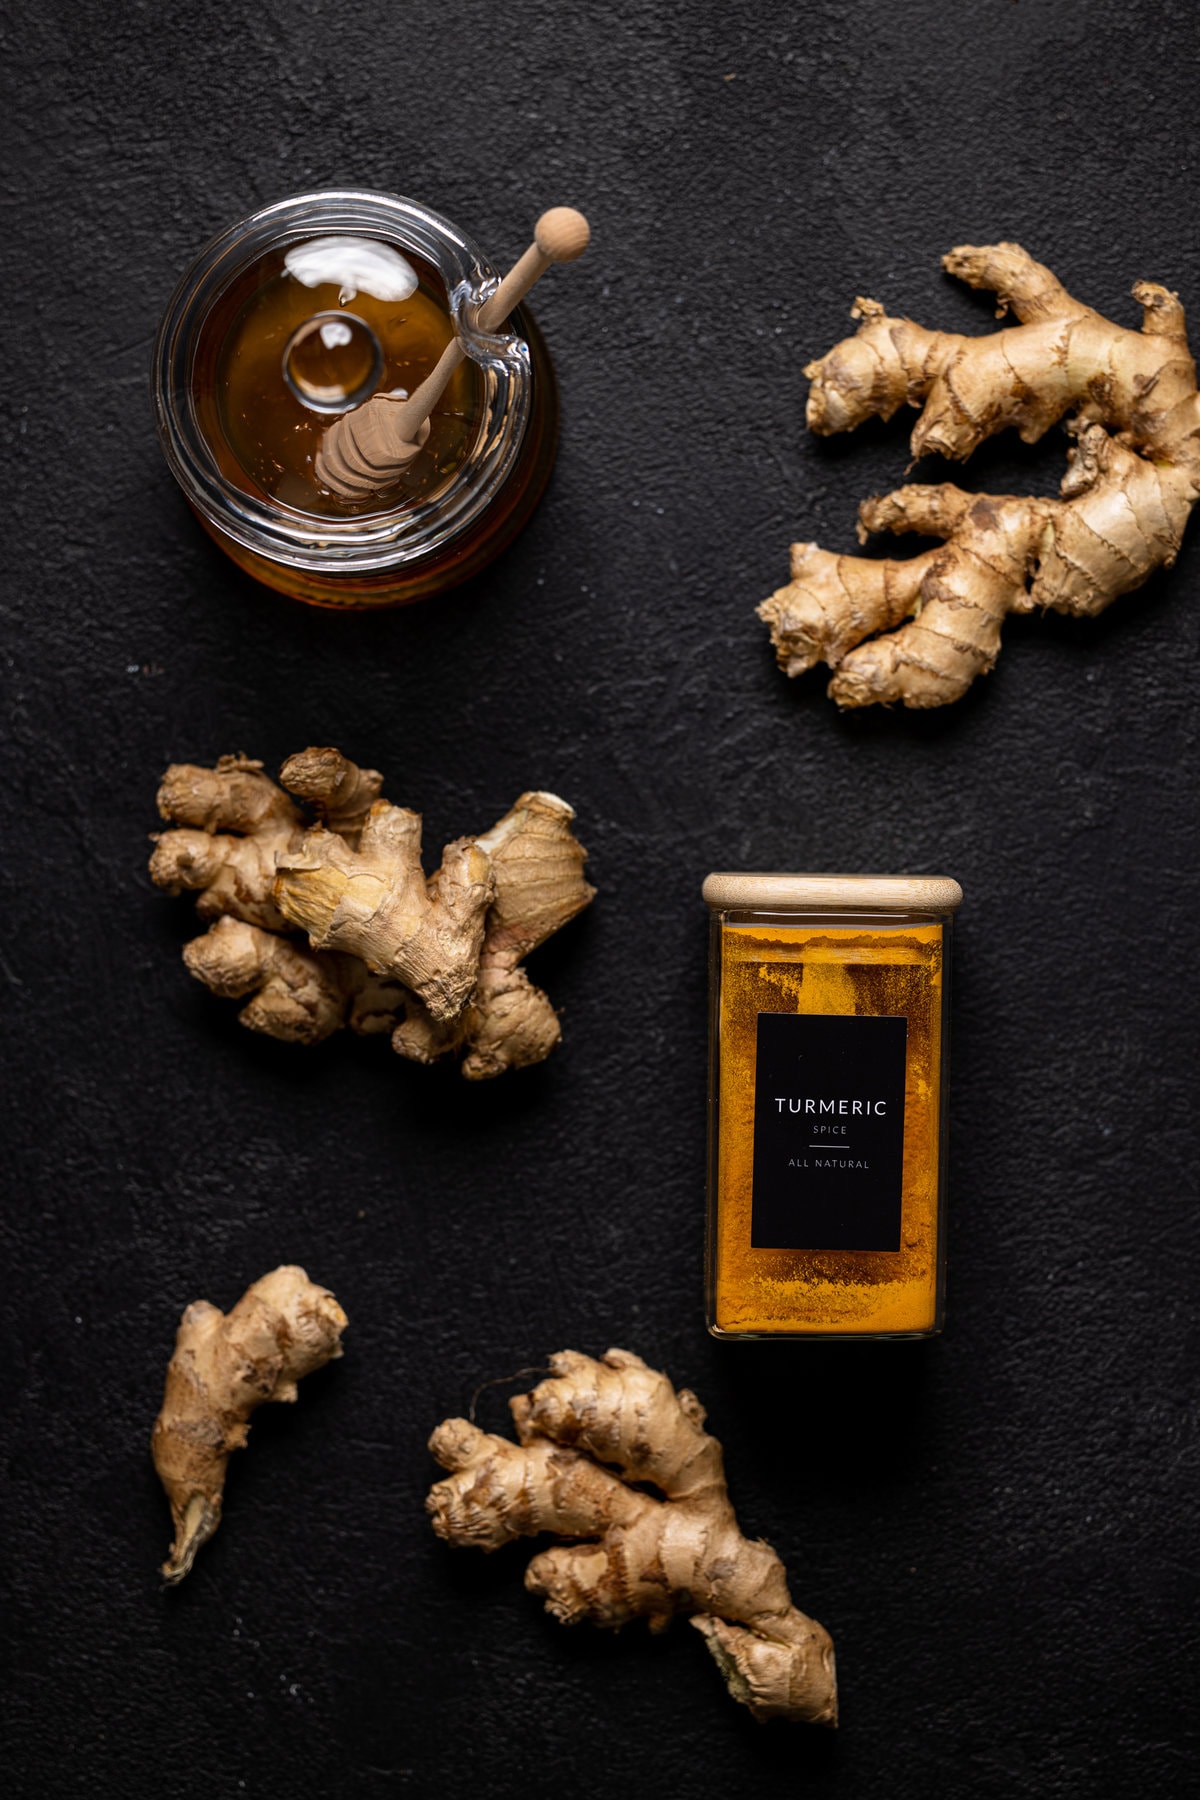 Jar of turmeric, jar of honey, and ginger roots